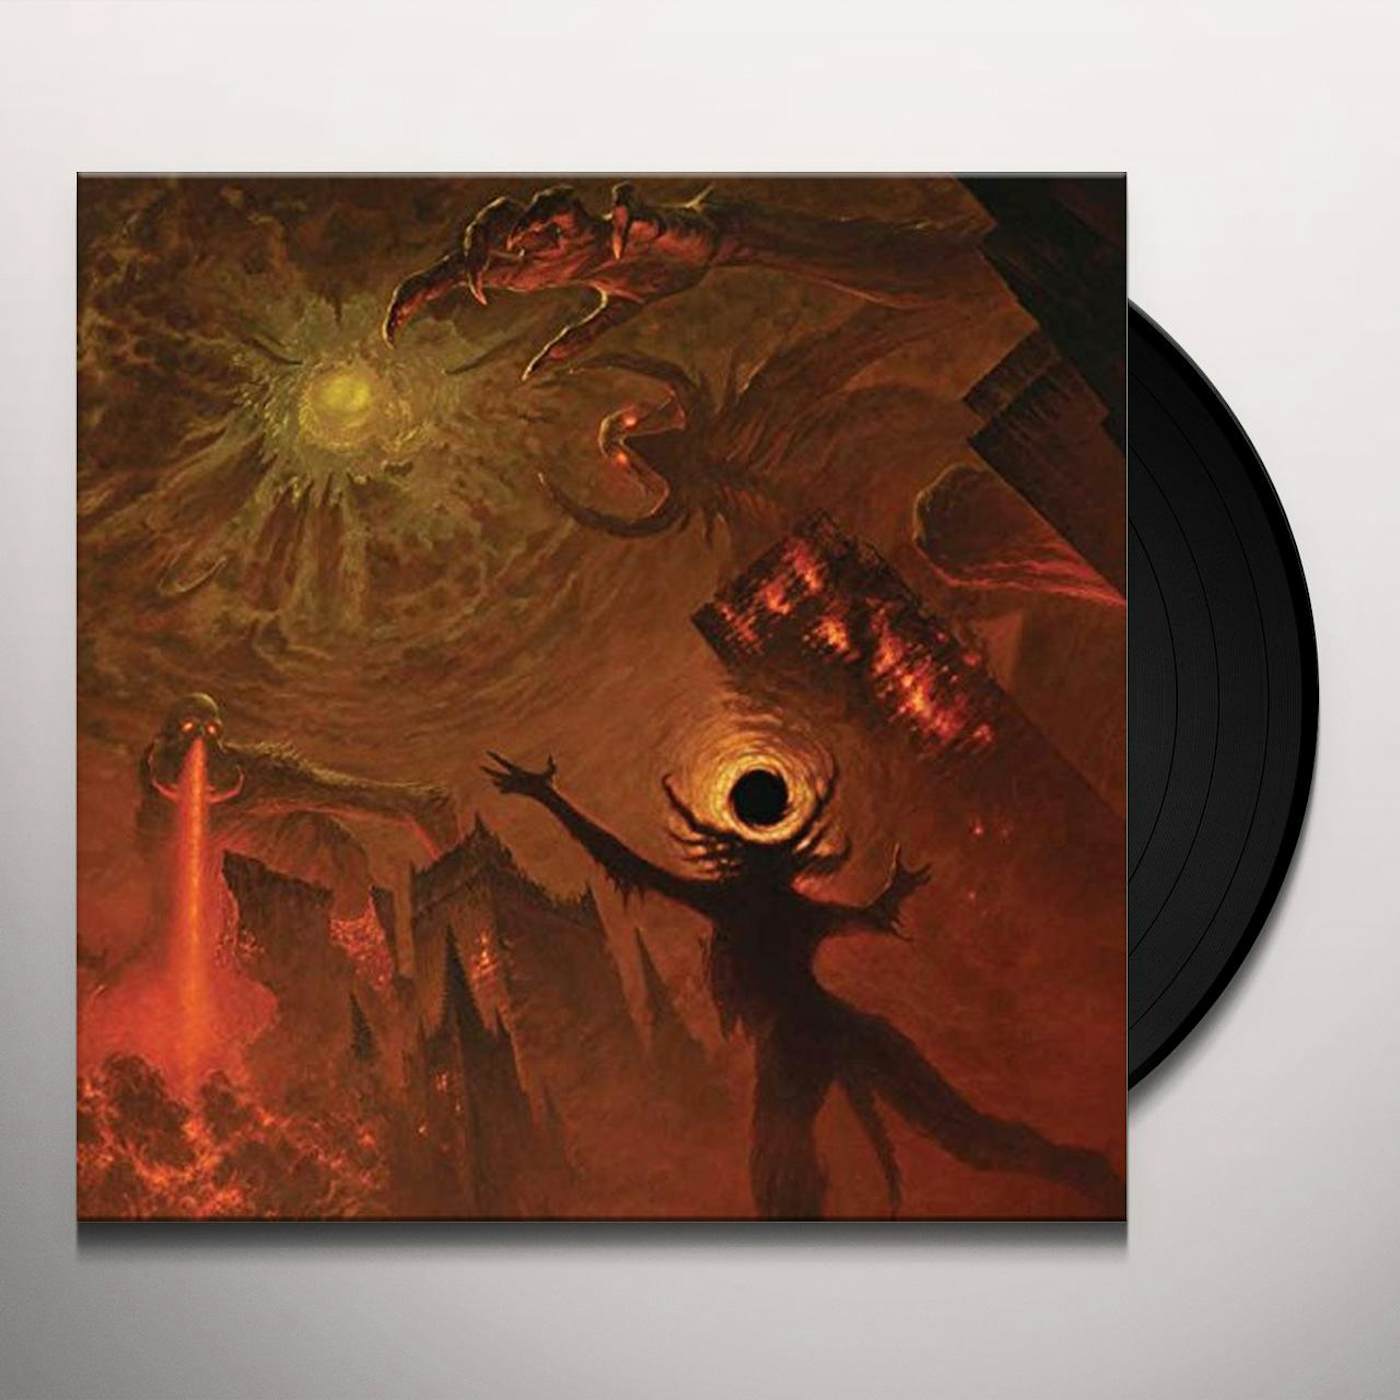 Horn of the Rhino Summoning Deliverance Vinyl Record